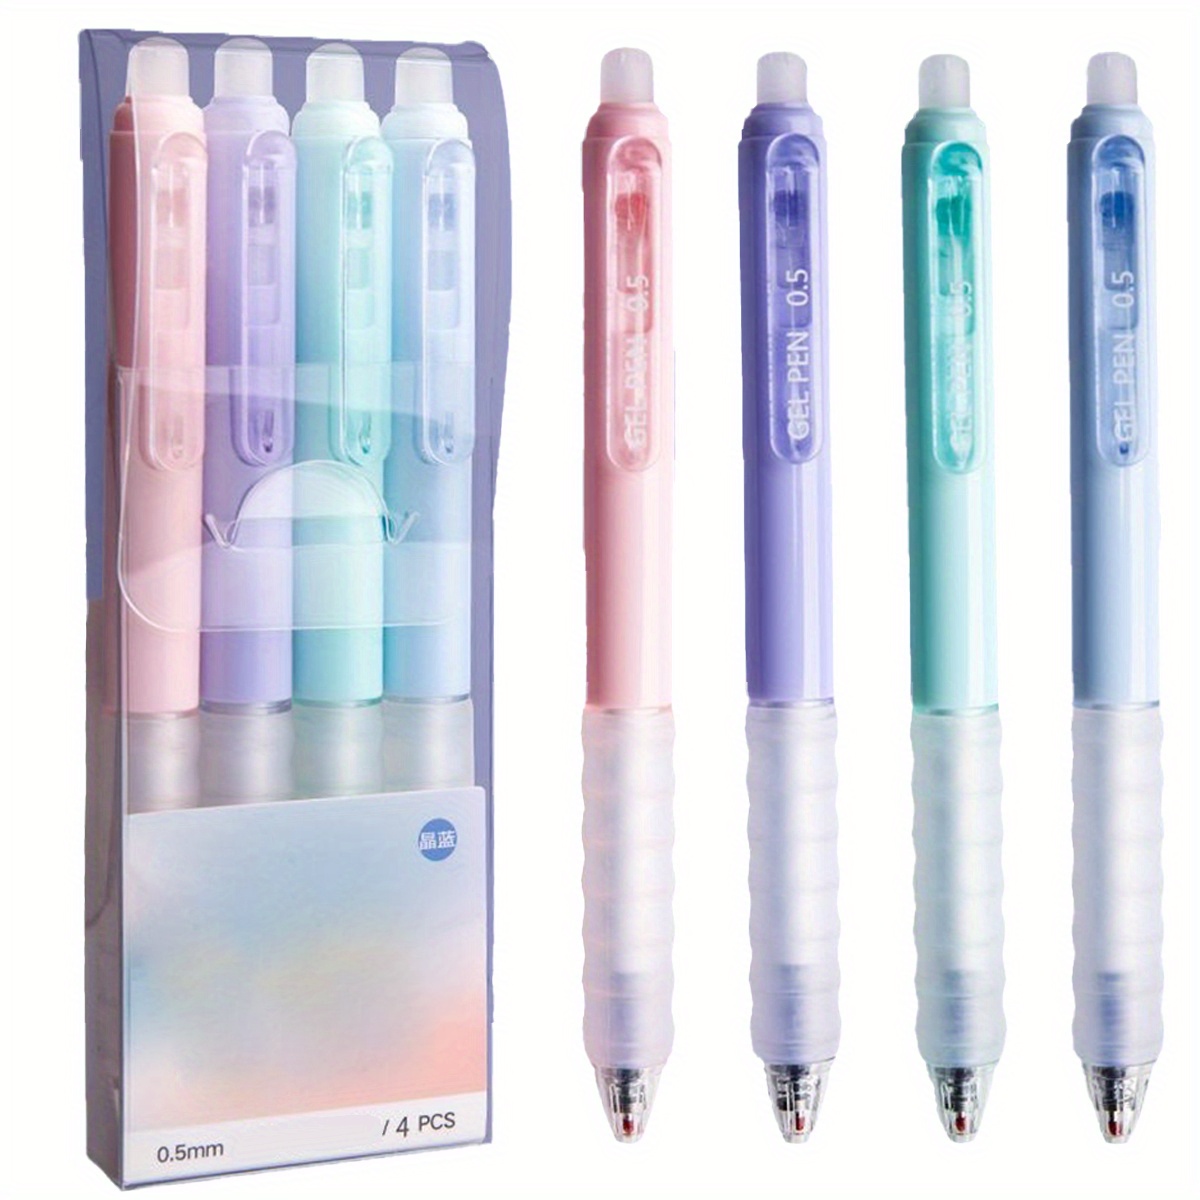 

Erasable Gel Ink Rollerball Pens - 4 Pack, 0.5mm Fine Point, Retractable, Office And School Supplies, Cute Aesthetic Stationery, Plastic Material